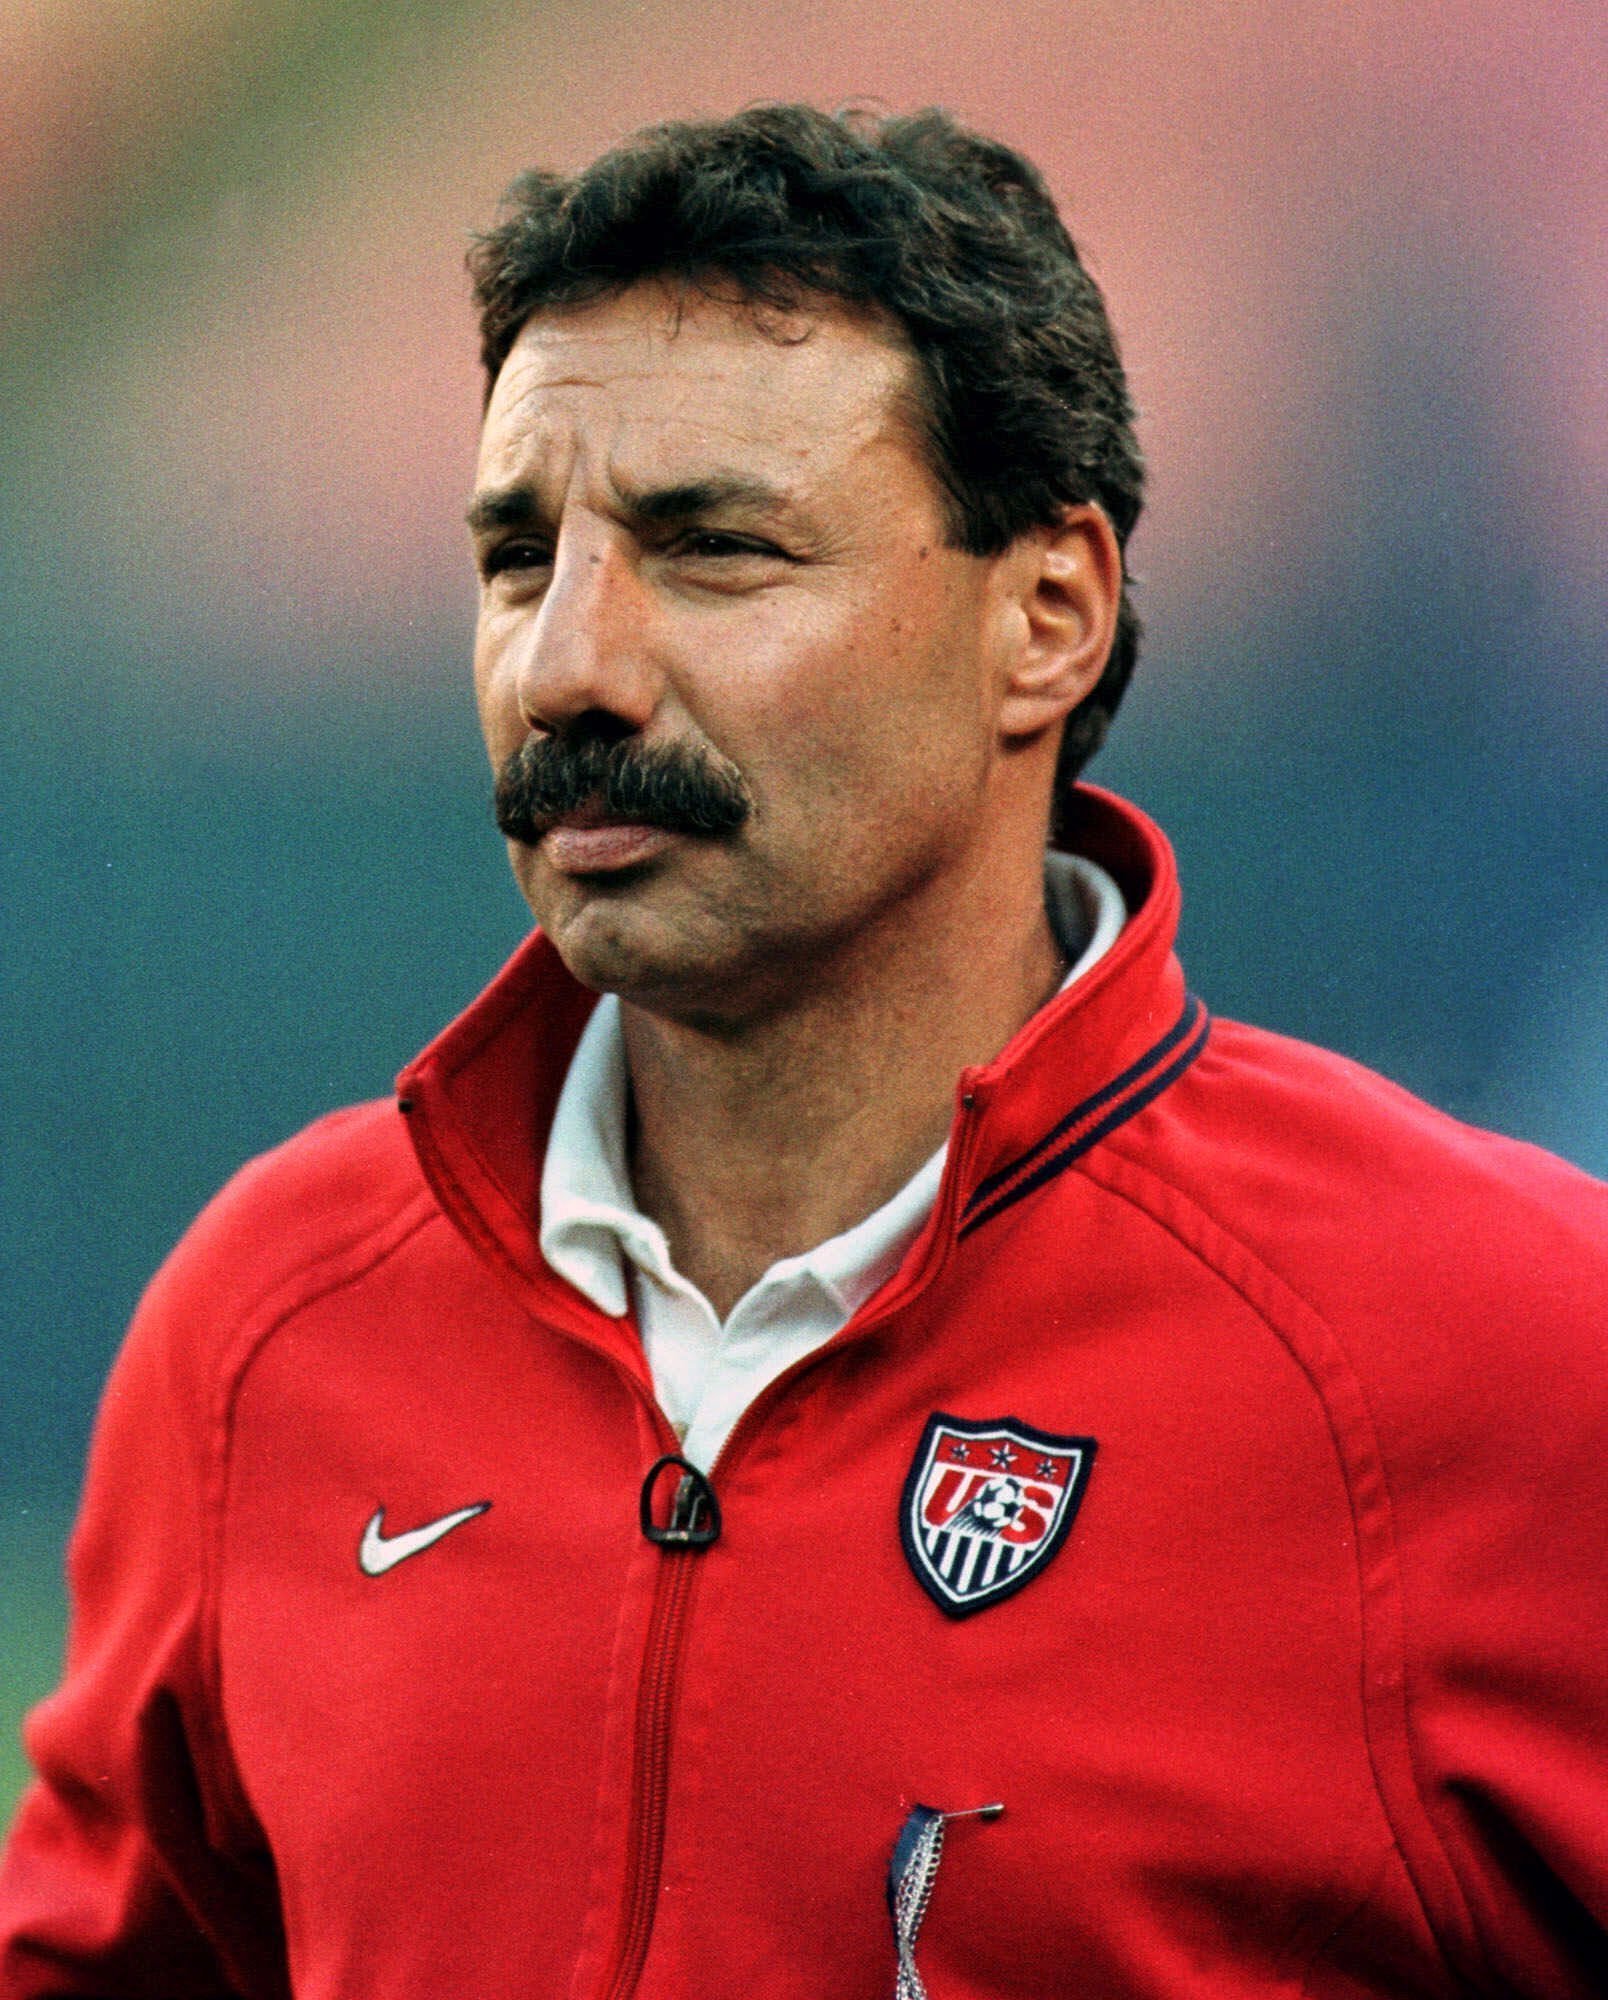 Tony DiCicco, who coached U.S. women's soccer team to 1999 World Cup ...